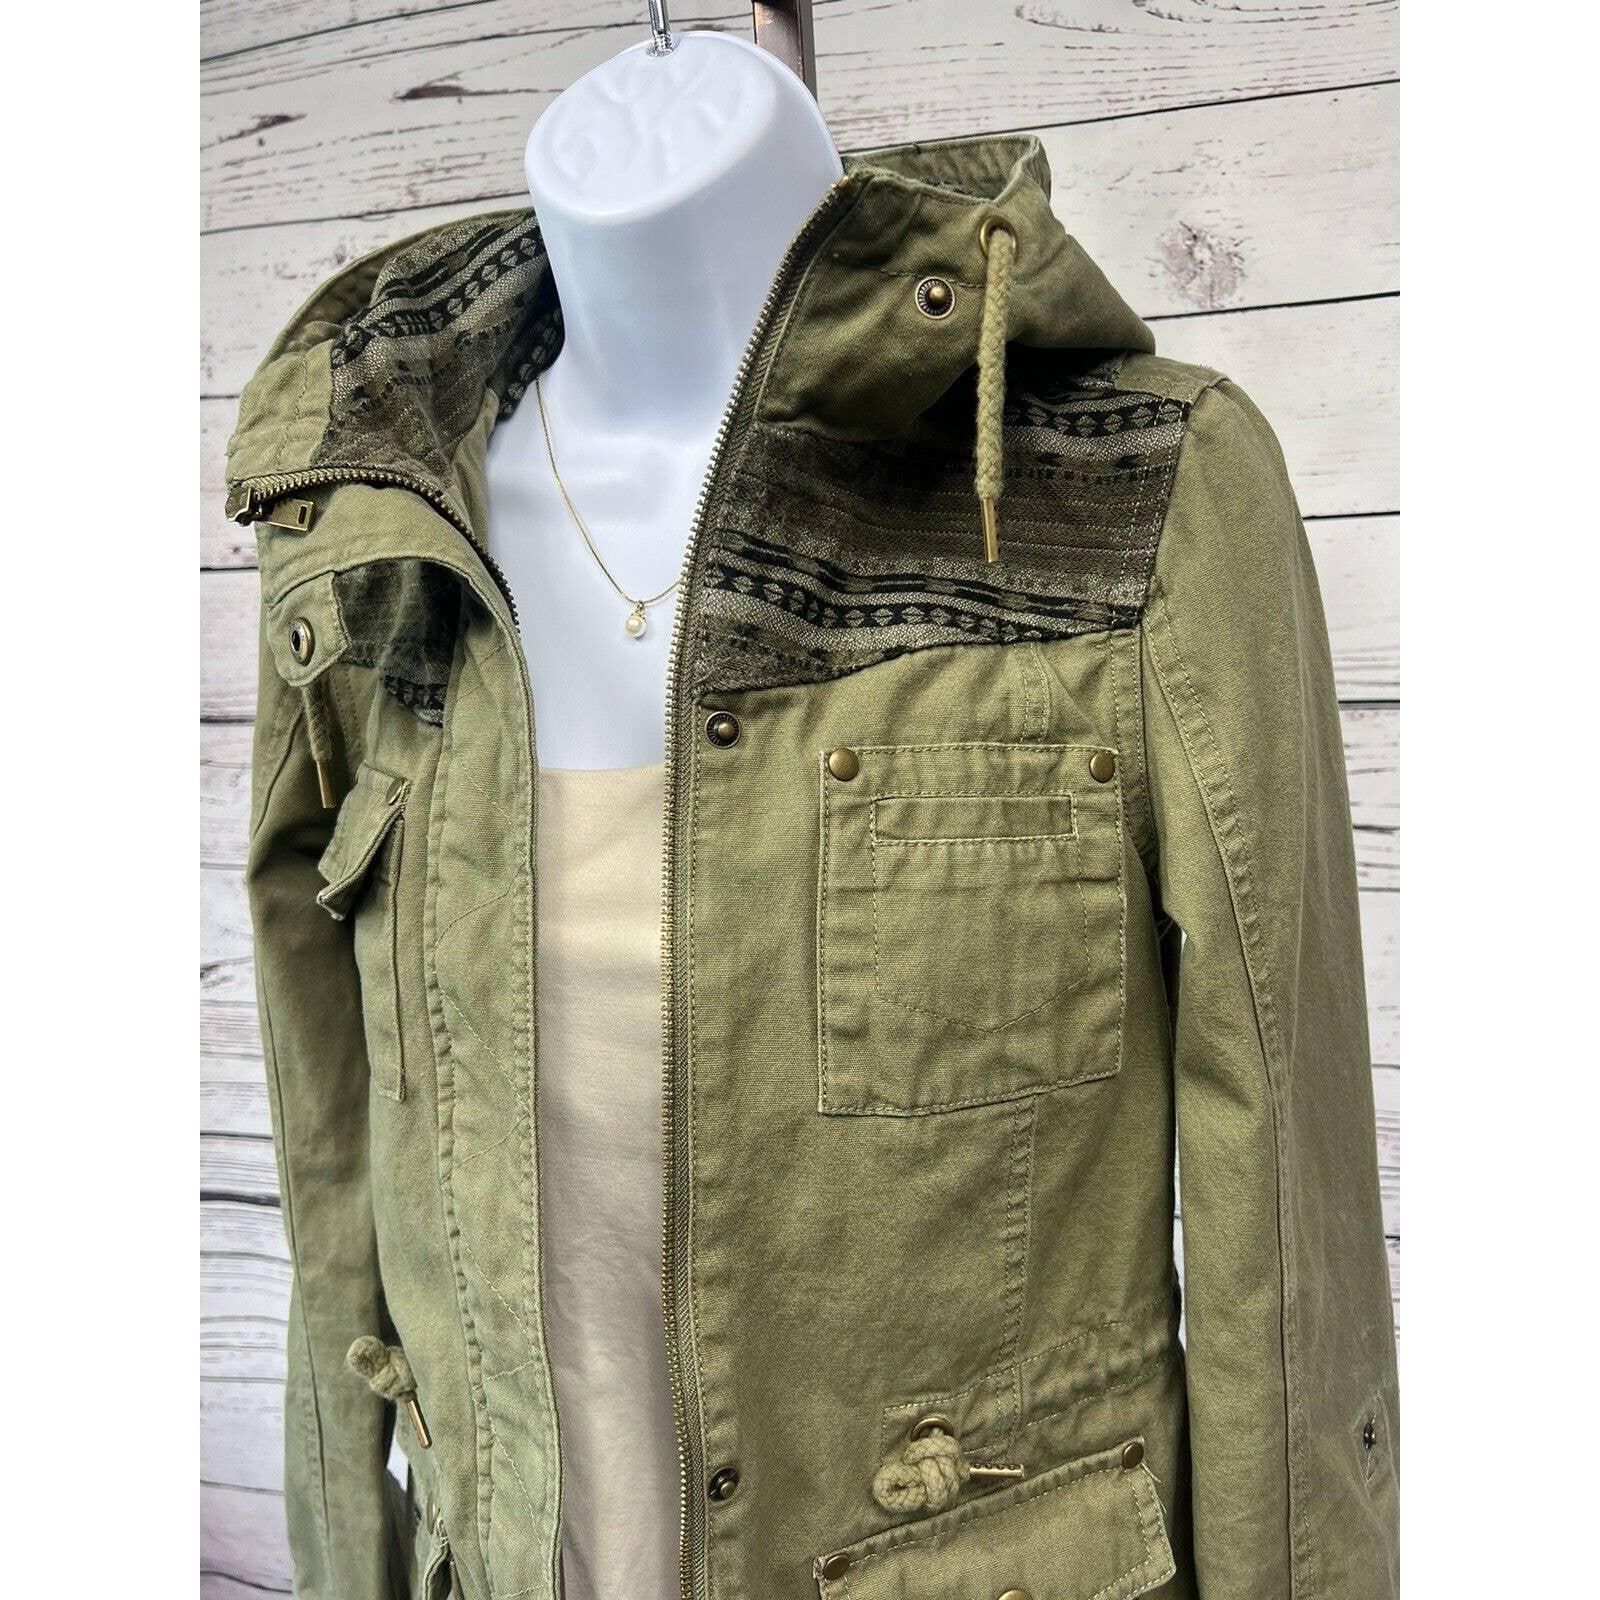 Altar’d State Military Jacket Women’s XS Hooded Green Geometic Tribal Pattern